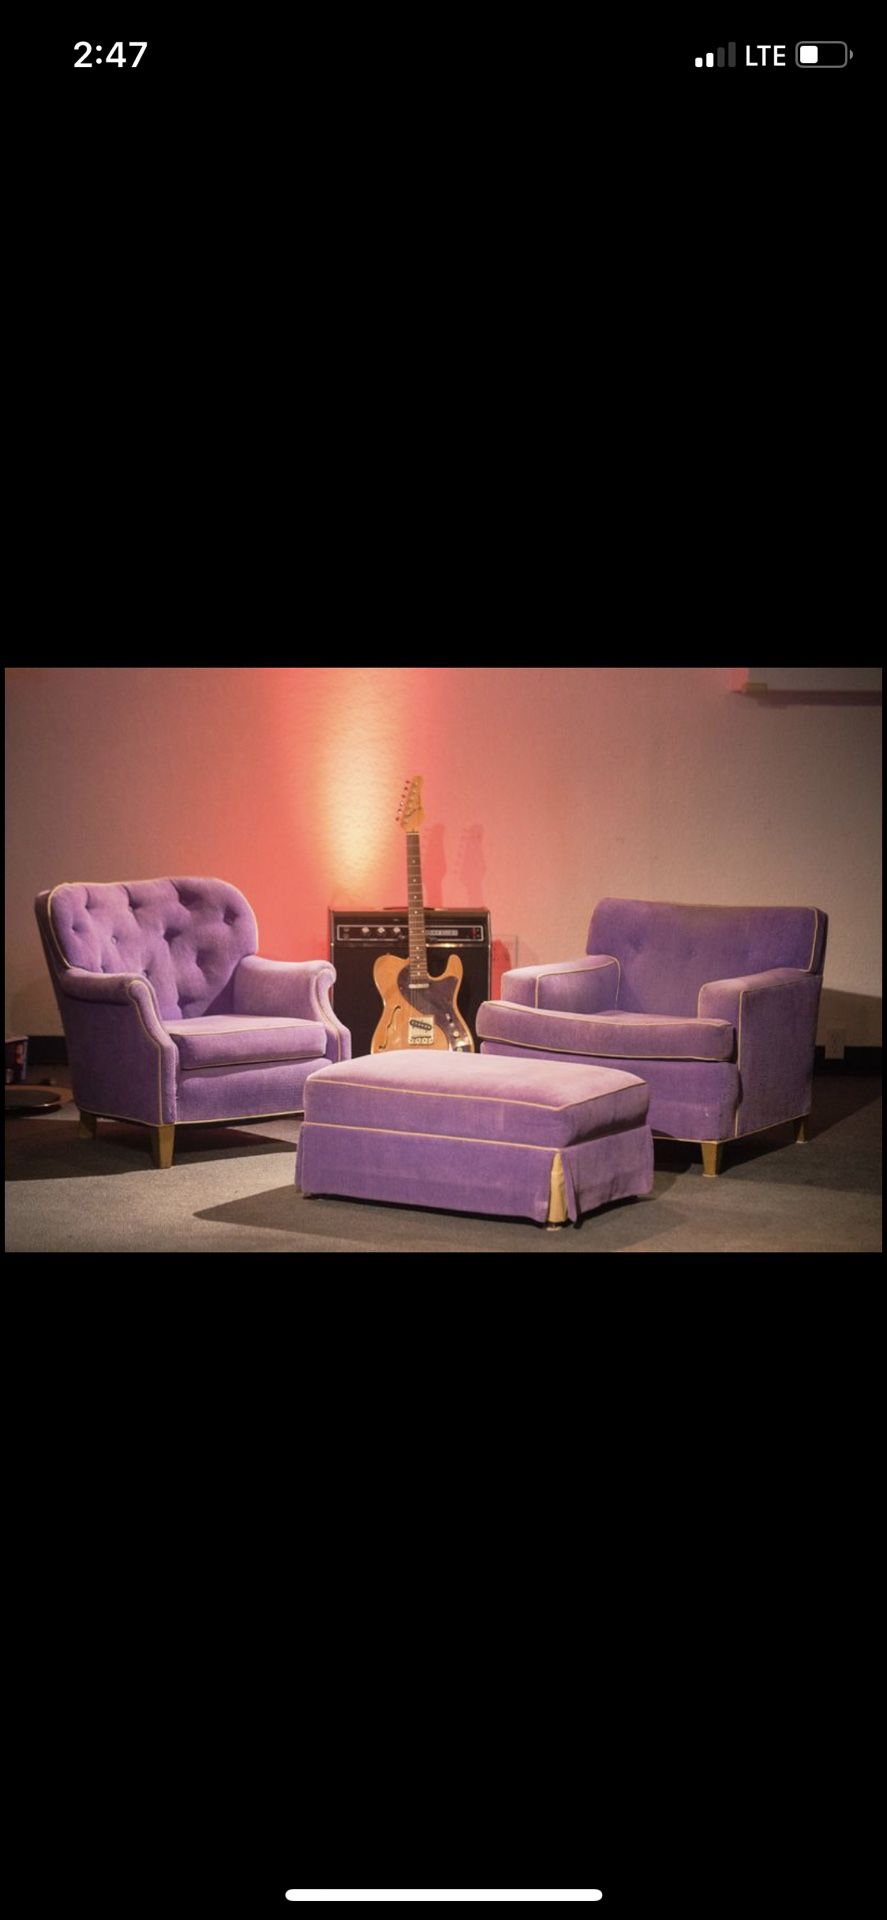 FREE Adorable RARE vintage lavender armchairs and matching ottoman! built in the 1940s & reupholstered!